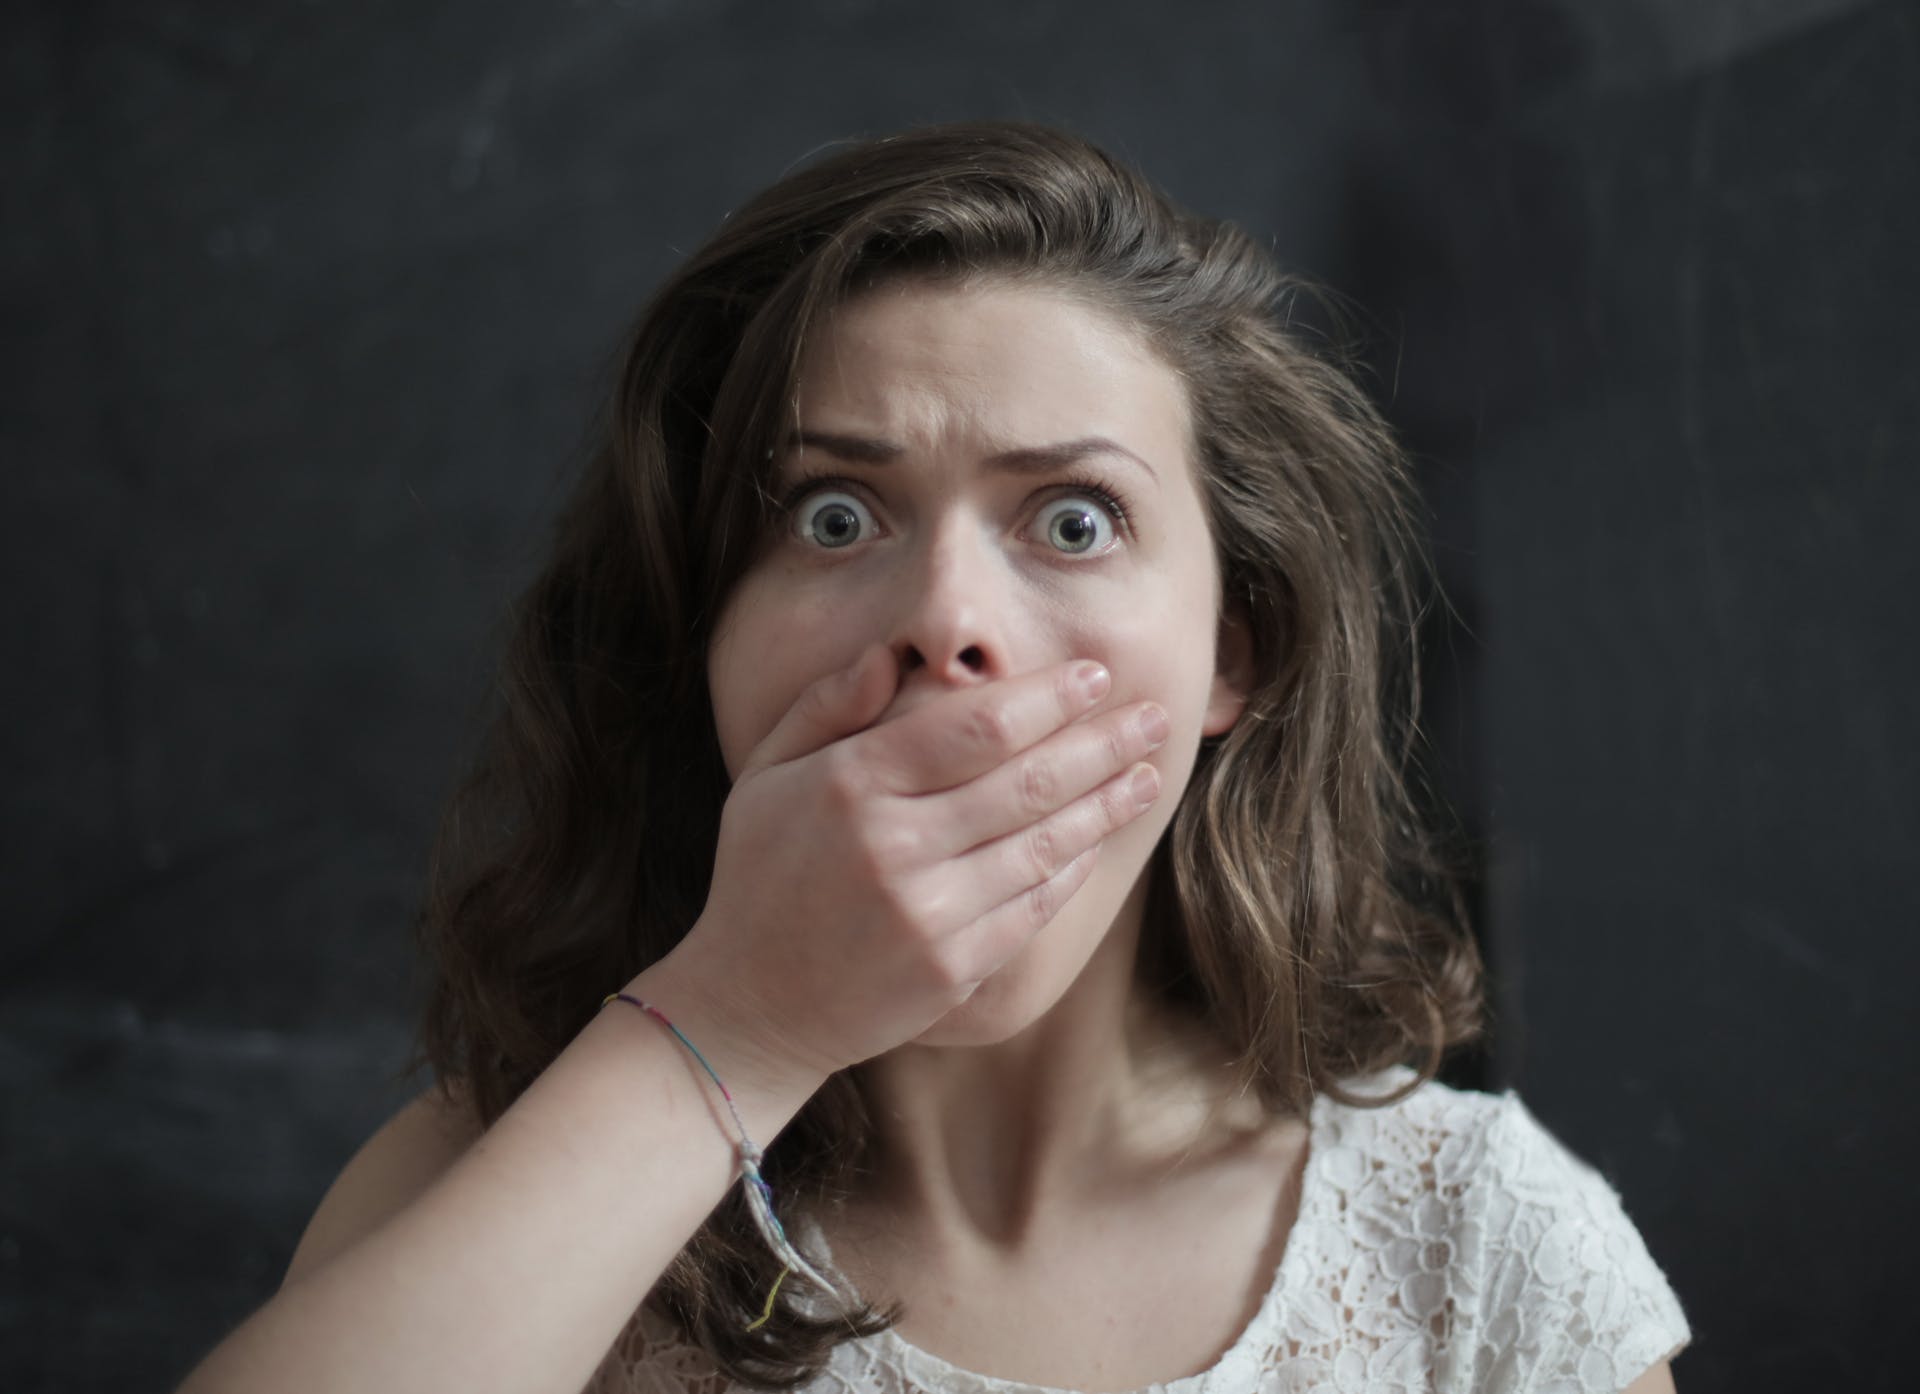 A shocked woman covering her mouth with her hand | Source: Pexels